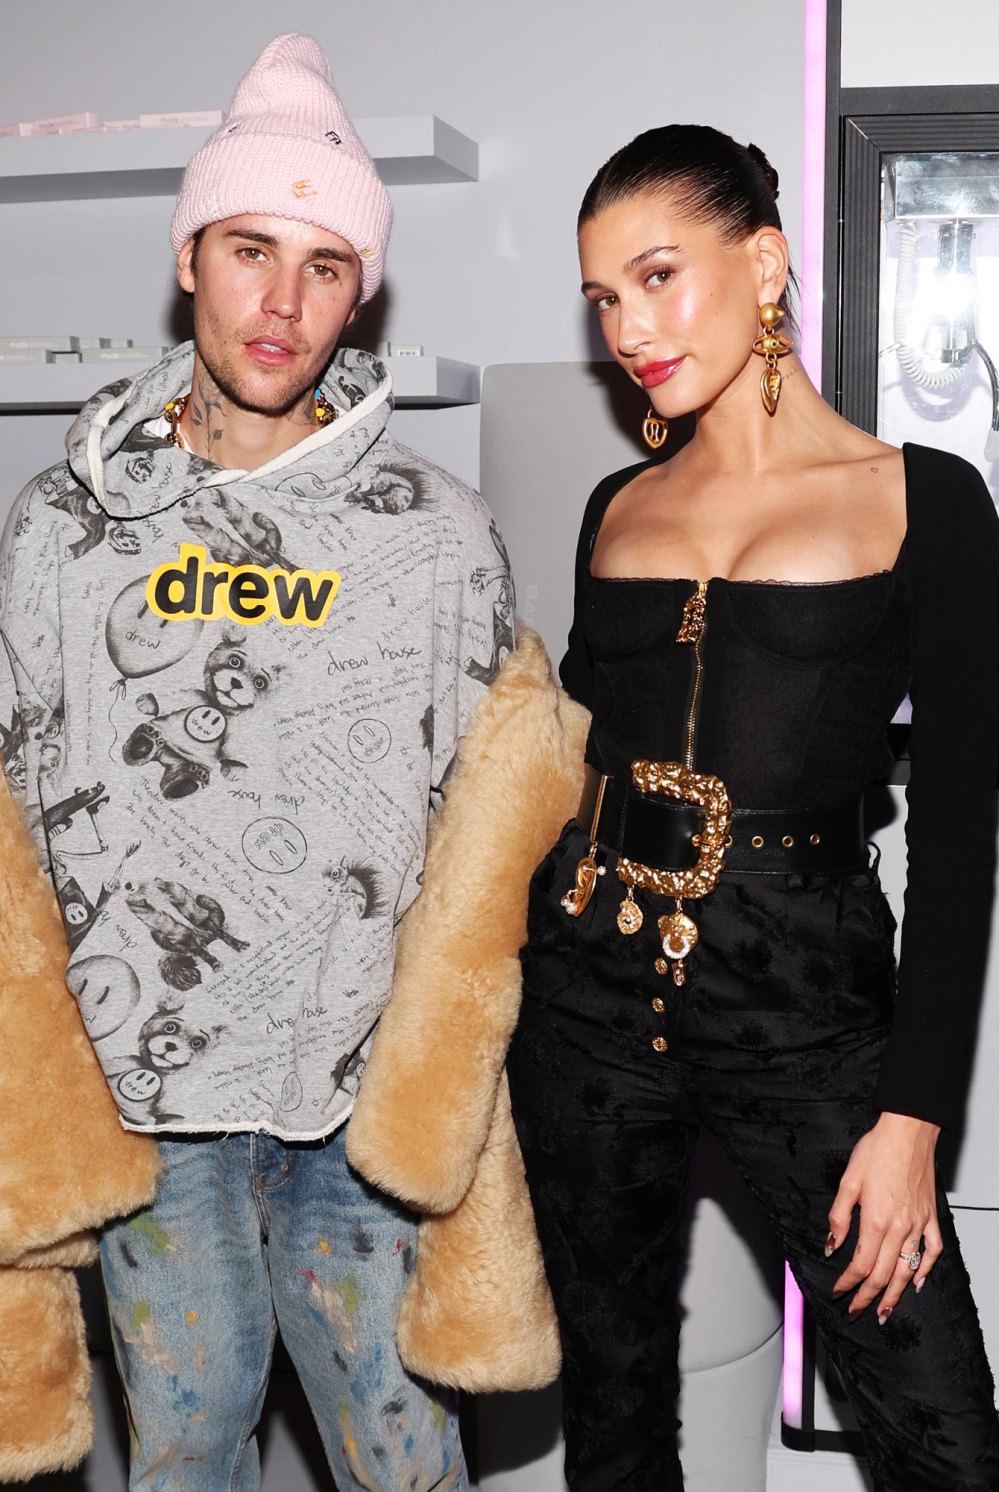 Hailey Bieber Didnt Want to Rush Into Having a Baby After Marrying Justin Bieber